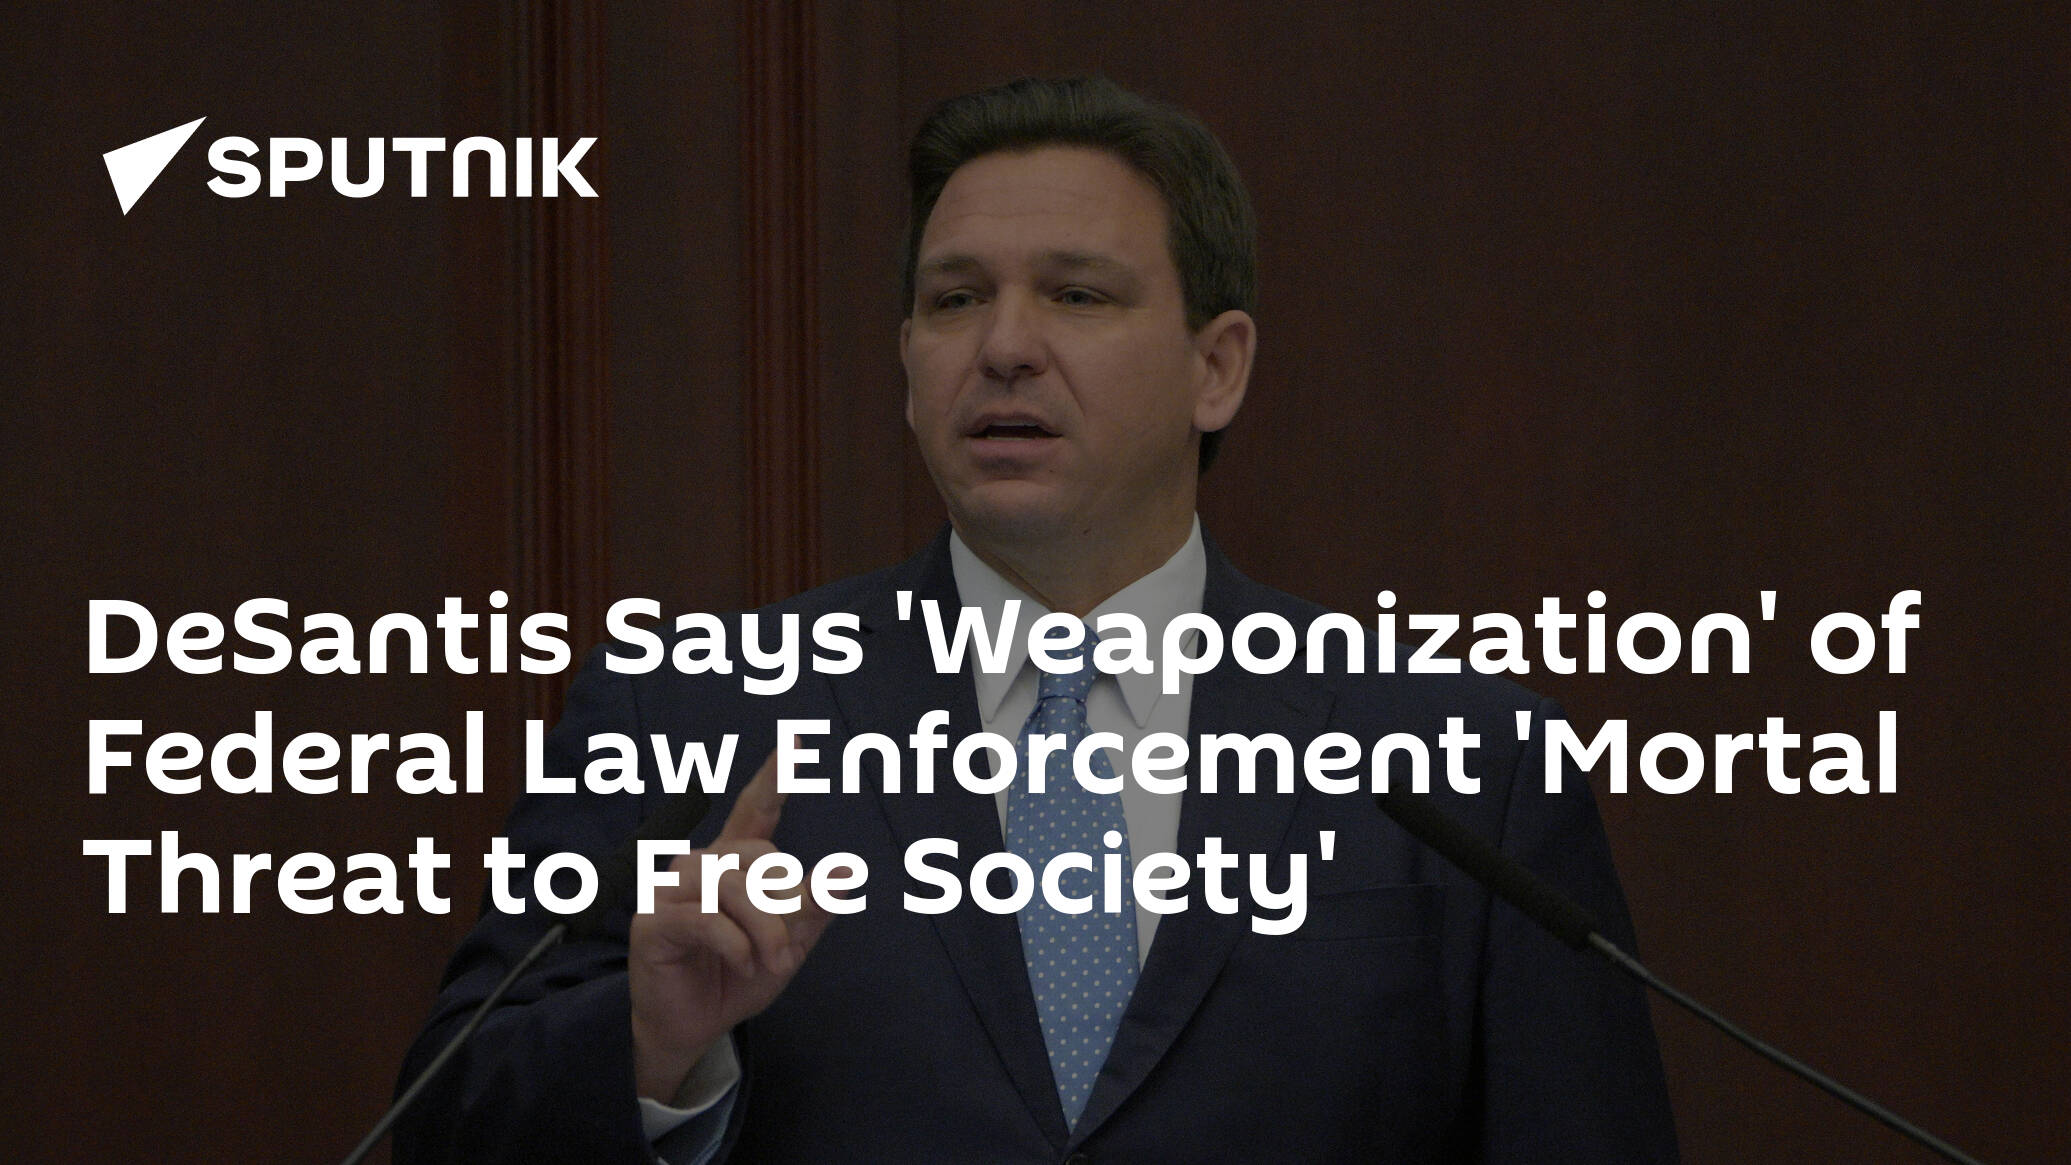 DeSantis Says 'Weaponization' of Federal Law Enforcement 'Mortal Threat to Free Society'